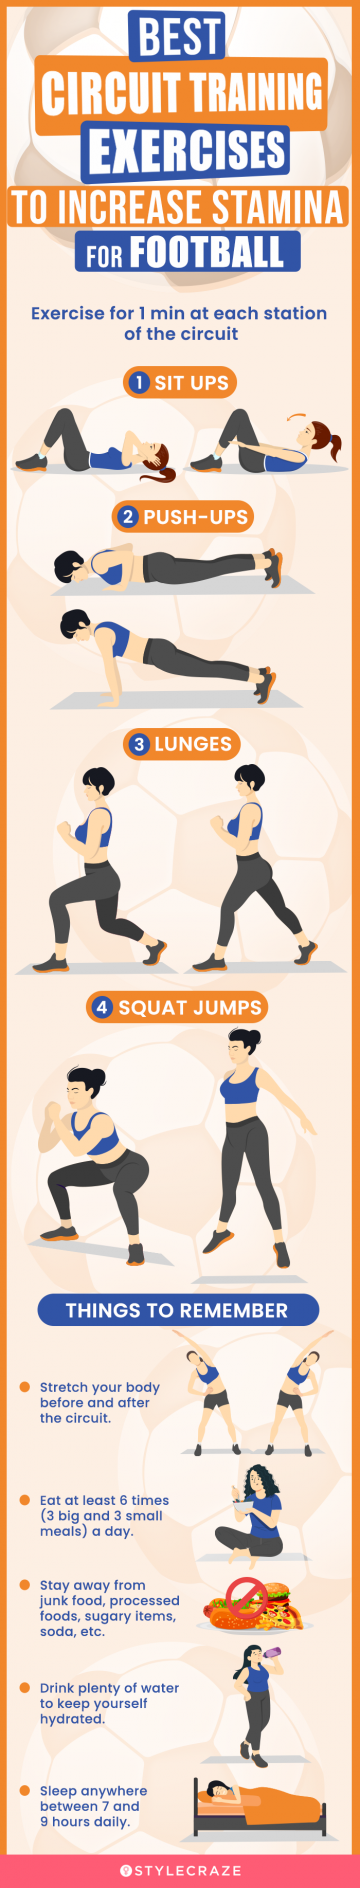 best circuit training exercises to increase stamina for football (infographic)